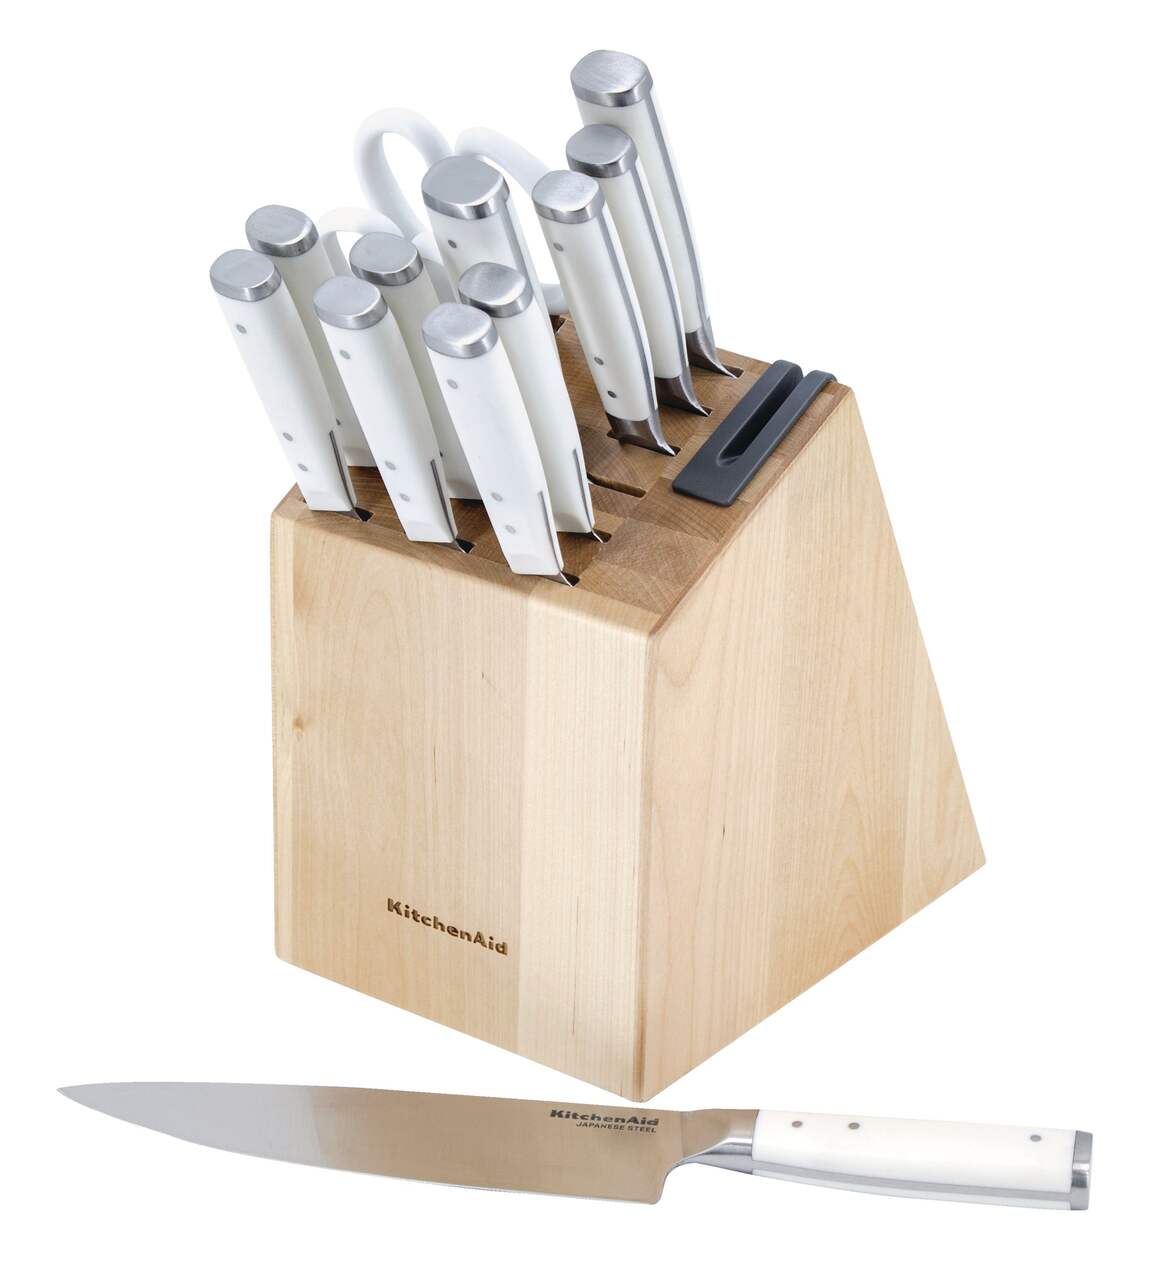 https://media-www.canadiantire.ca/product/living/kitchen/cutlery/1426742/ka-14pc-tripe-forged-cutlery-block-white--1cd5eb08-e0aa-47af-8360-b2ebbbd3ce87-jpgrendition.jpg?imdensity=1&imwidth=640&impolicy=mZoom